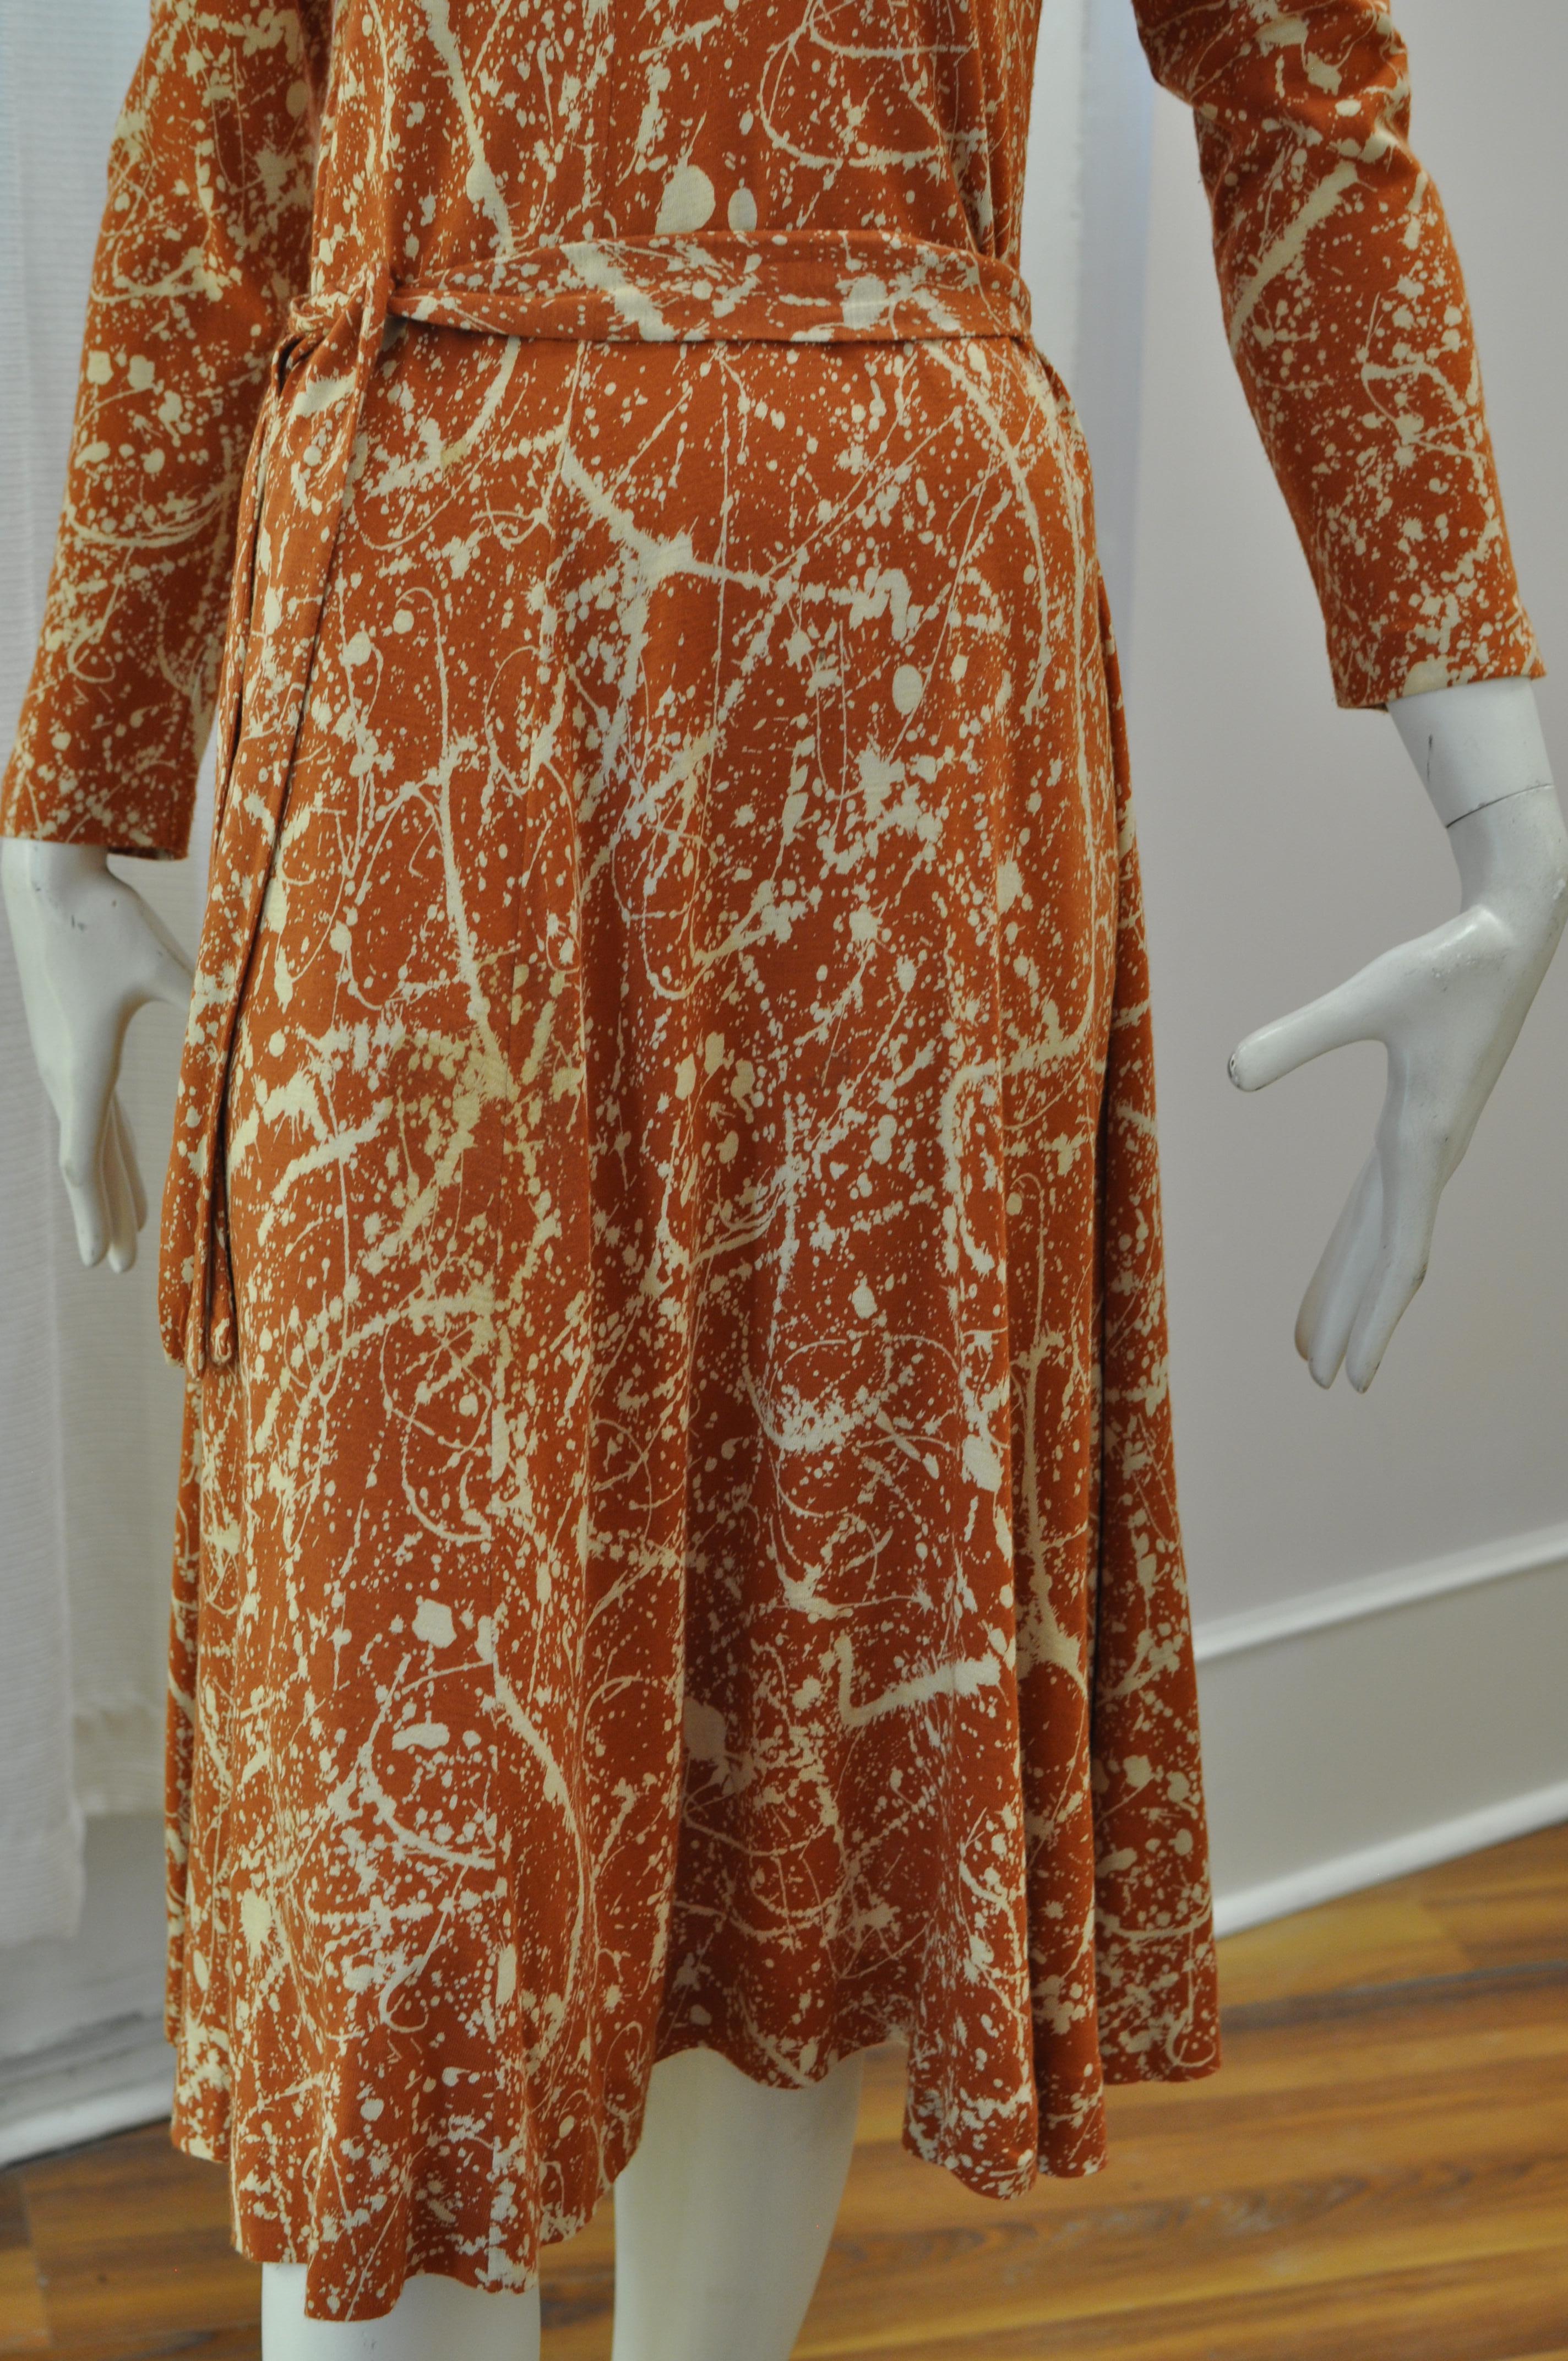 This is a very special  DVF dress in burnt orange and white made in Italy. The dress can be worn with or without the belt.
The material is an acrylic jersey.